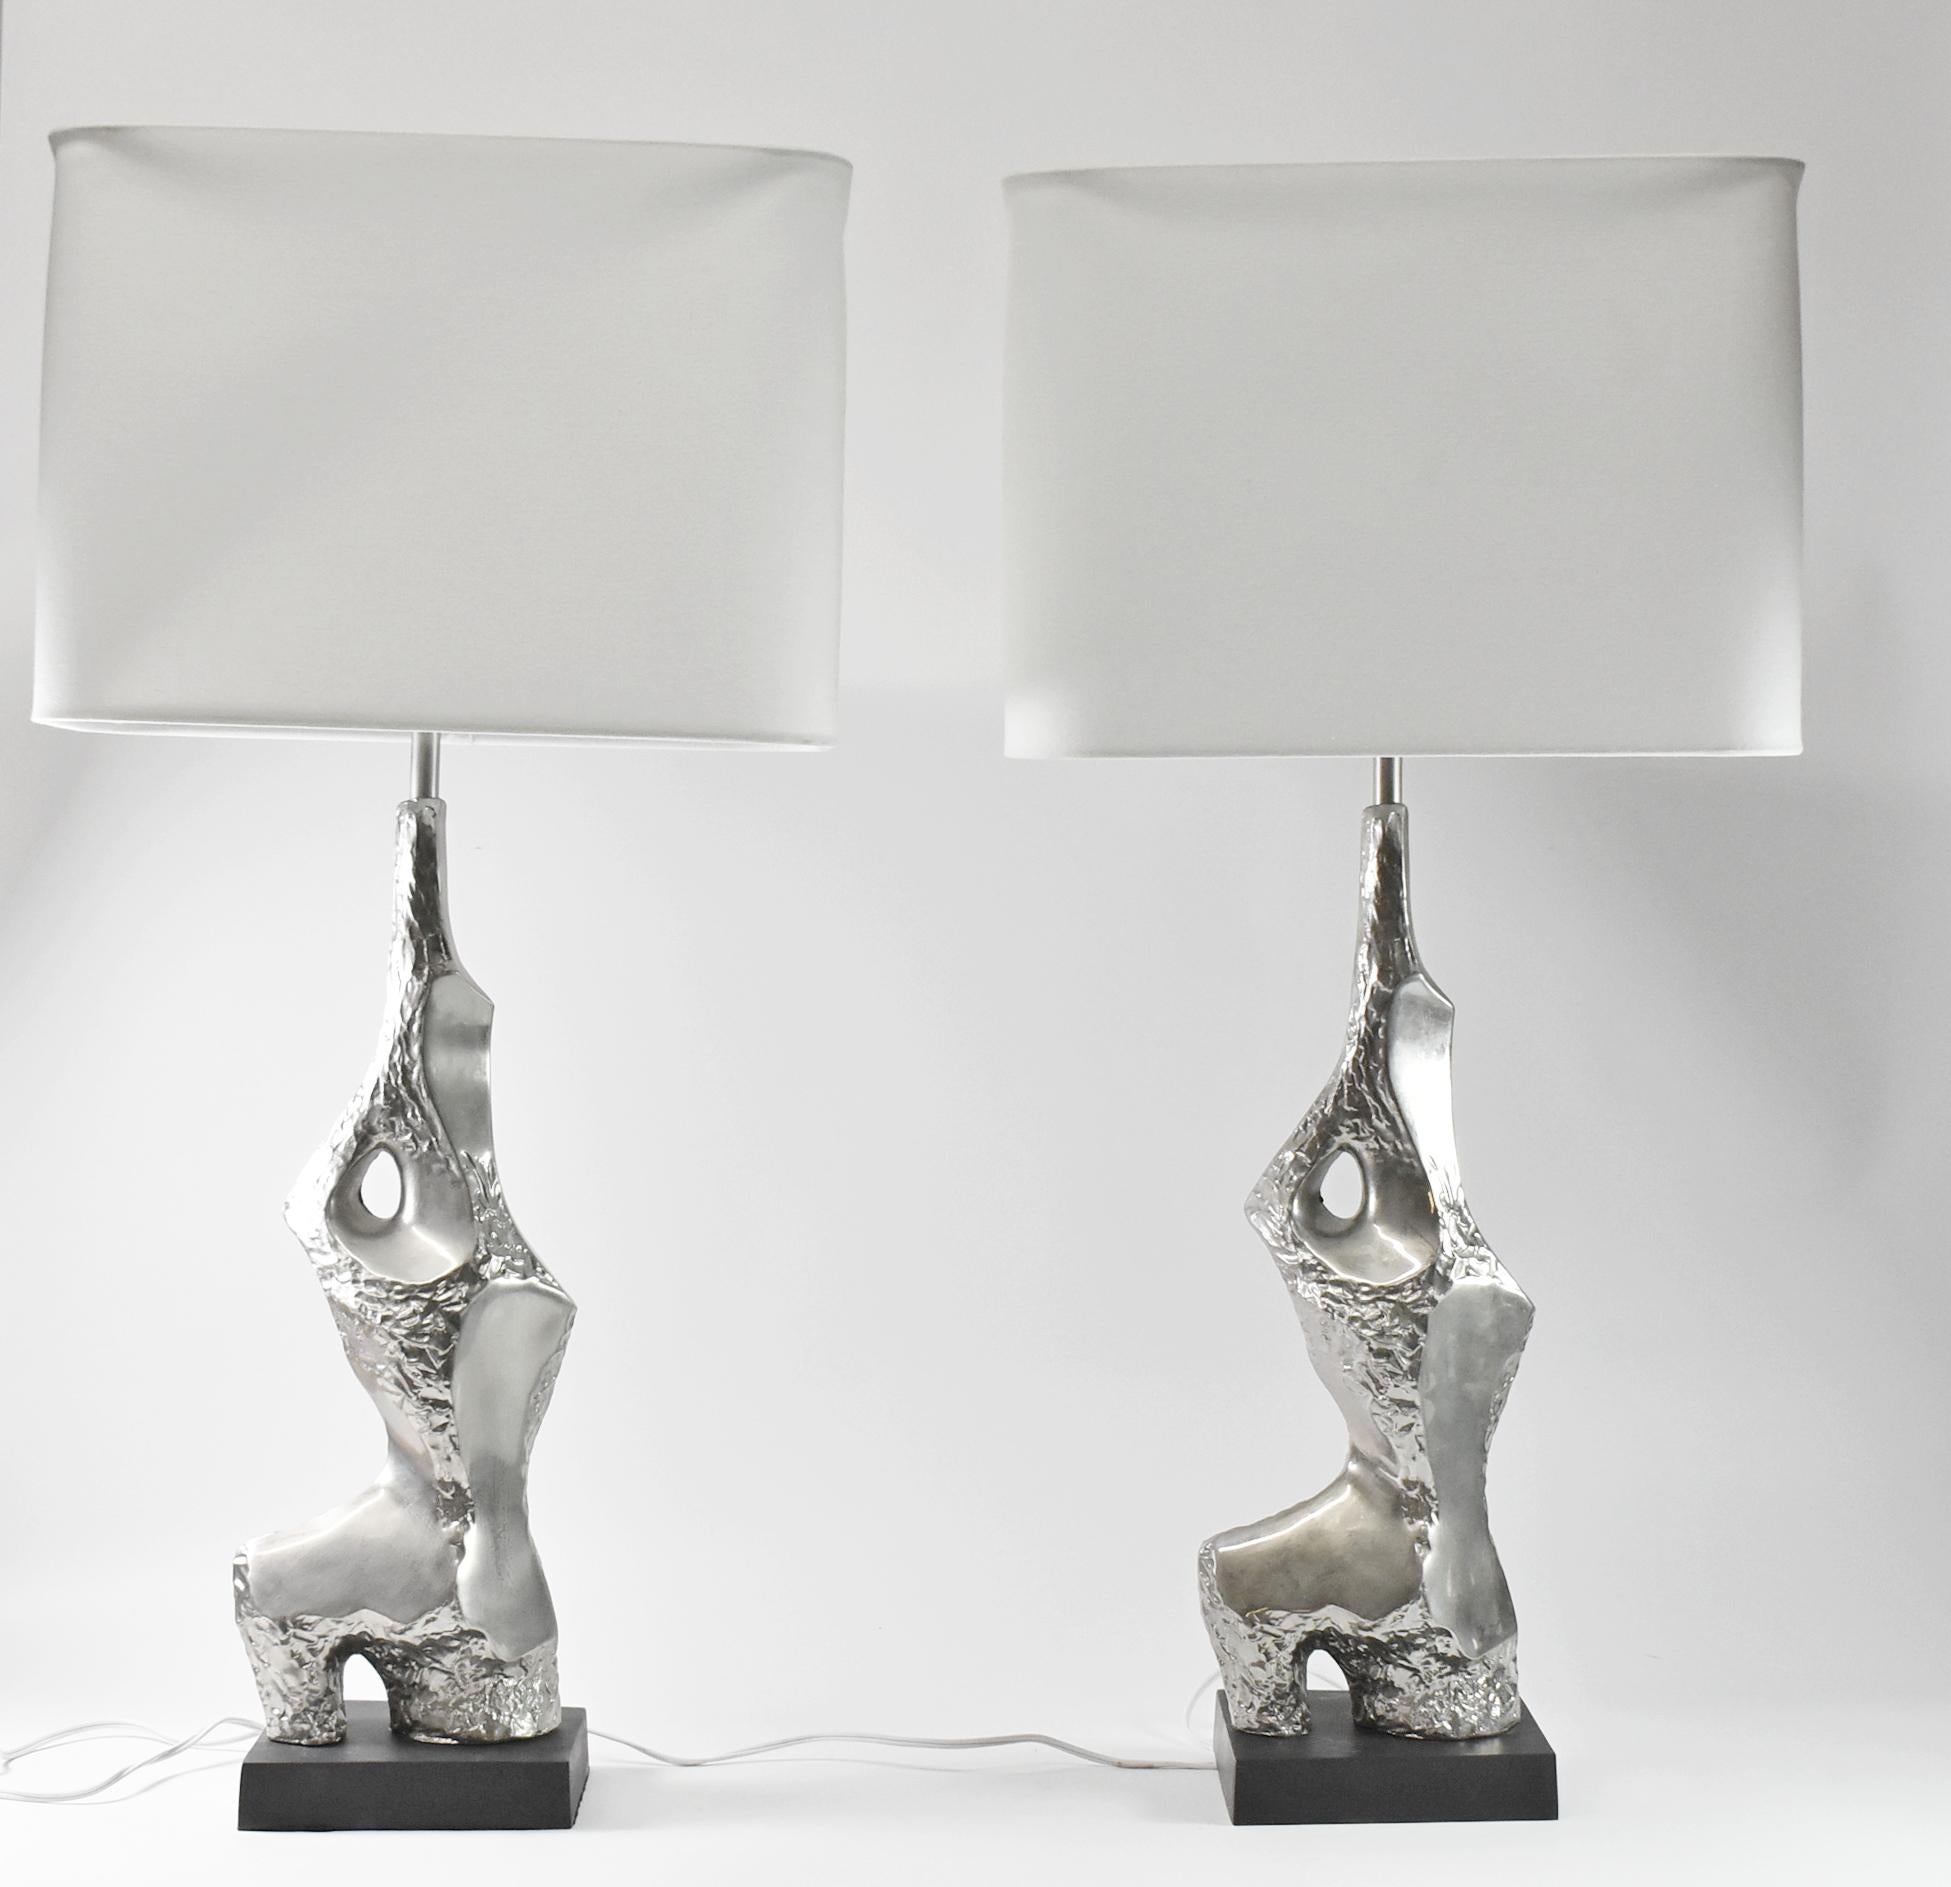 Pair of Chrome Laurel vintage table lamps Brutalist Abstract by Richard Barr. These chrome lamps have a tall thin Brutalist design with a trapezoidal black ebonized wood base. Good condition. Scratches on the base consistent with wear and tear as